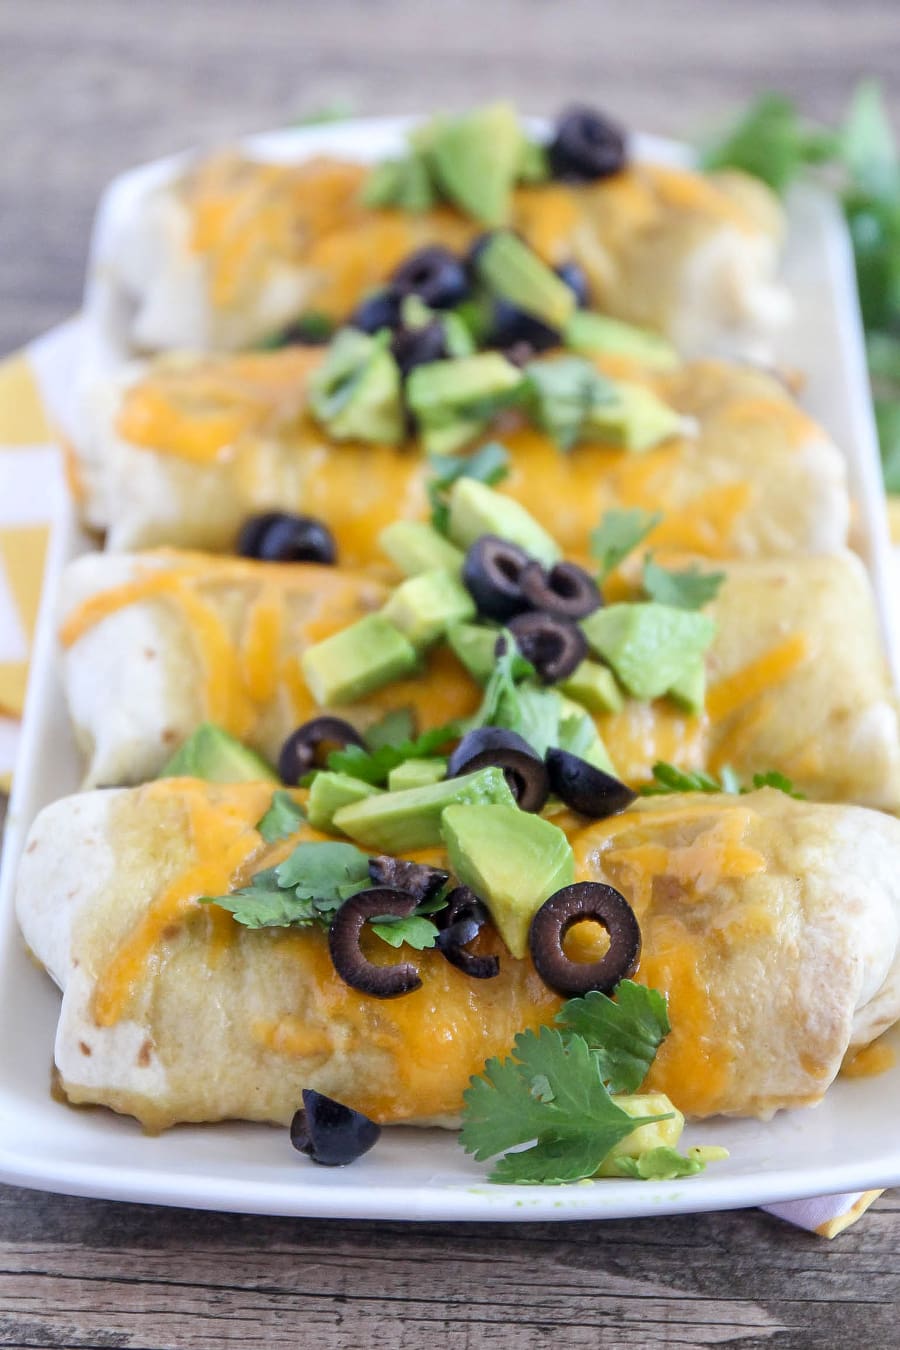 Green Chili Burritos topped with cilantro, avocado and olives on a white platter